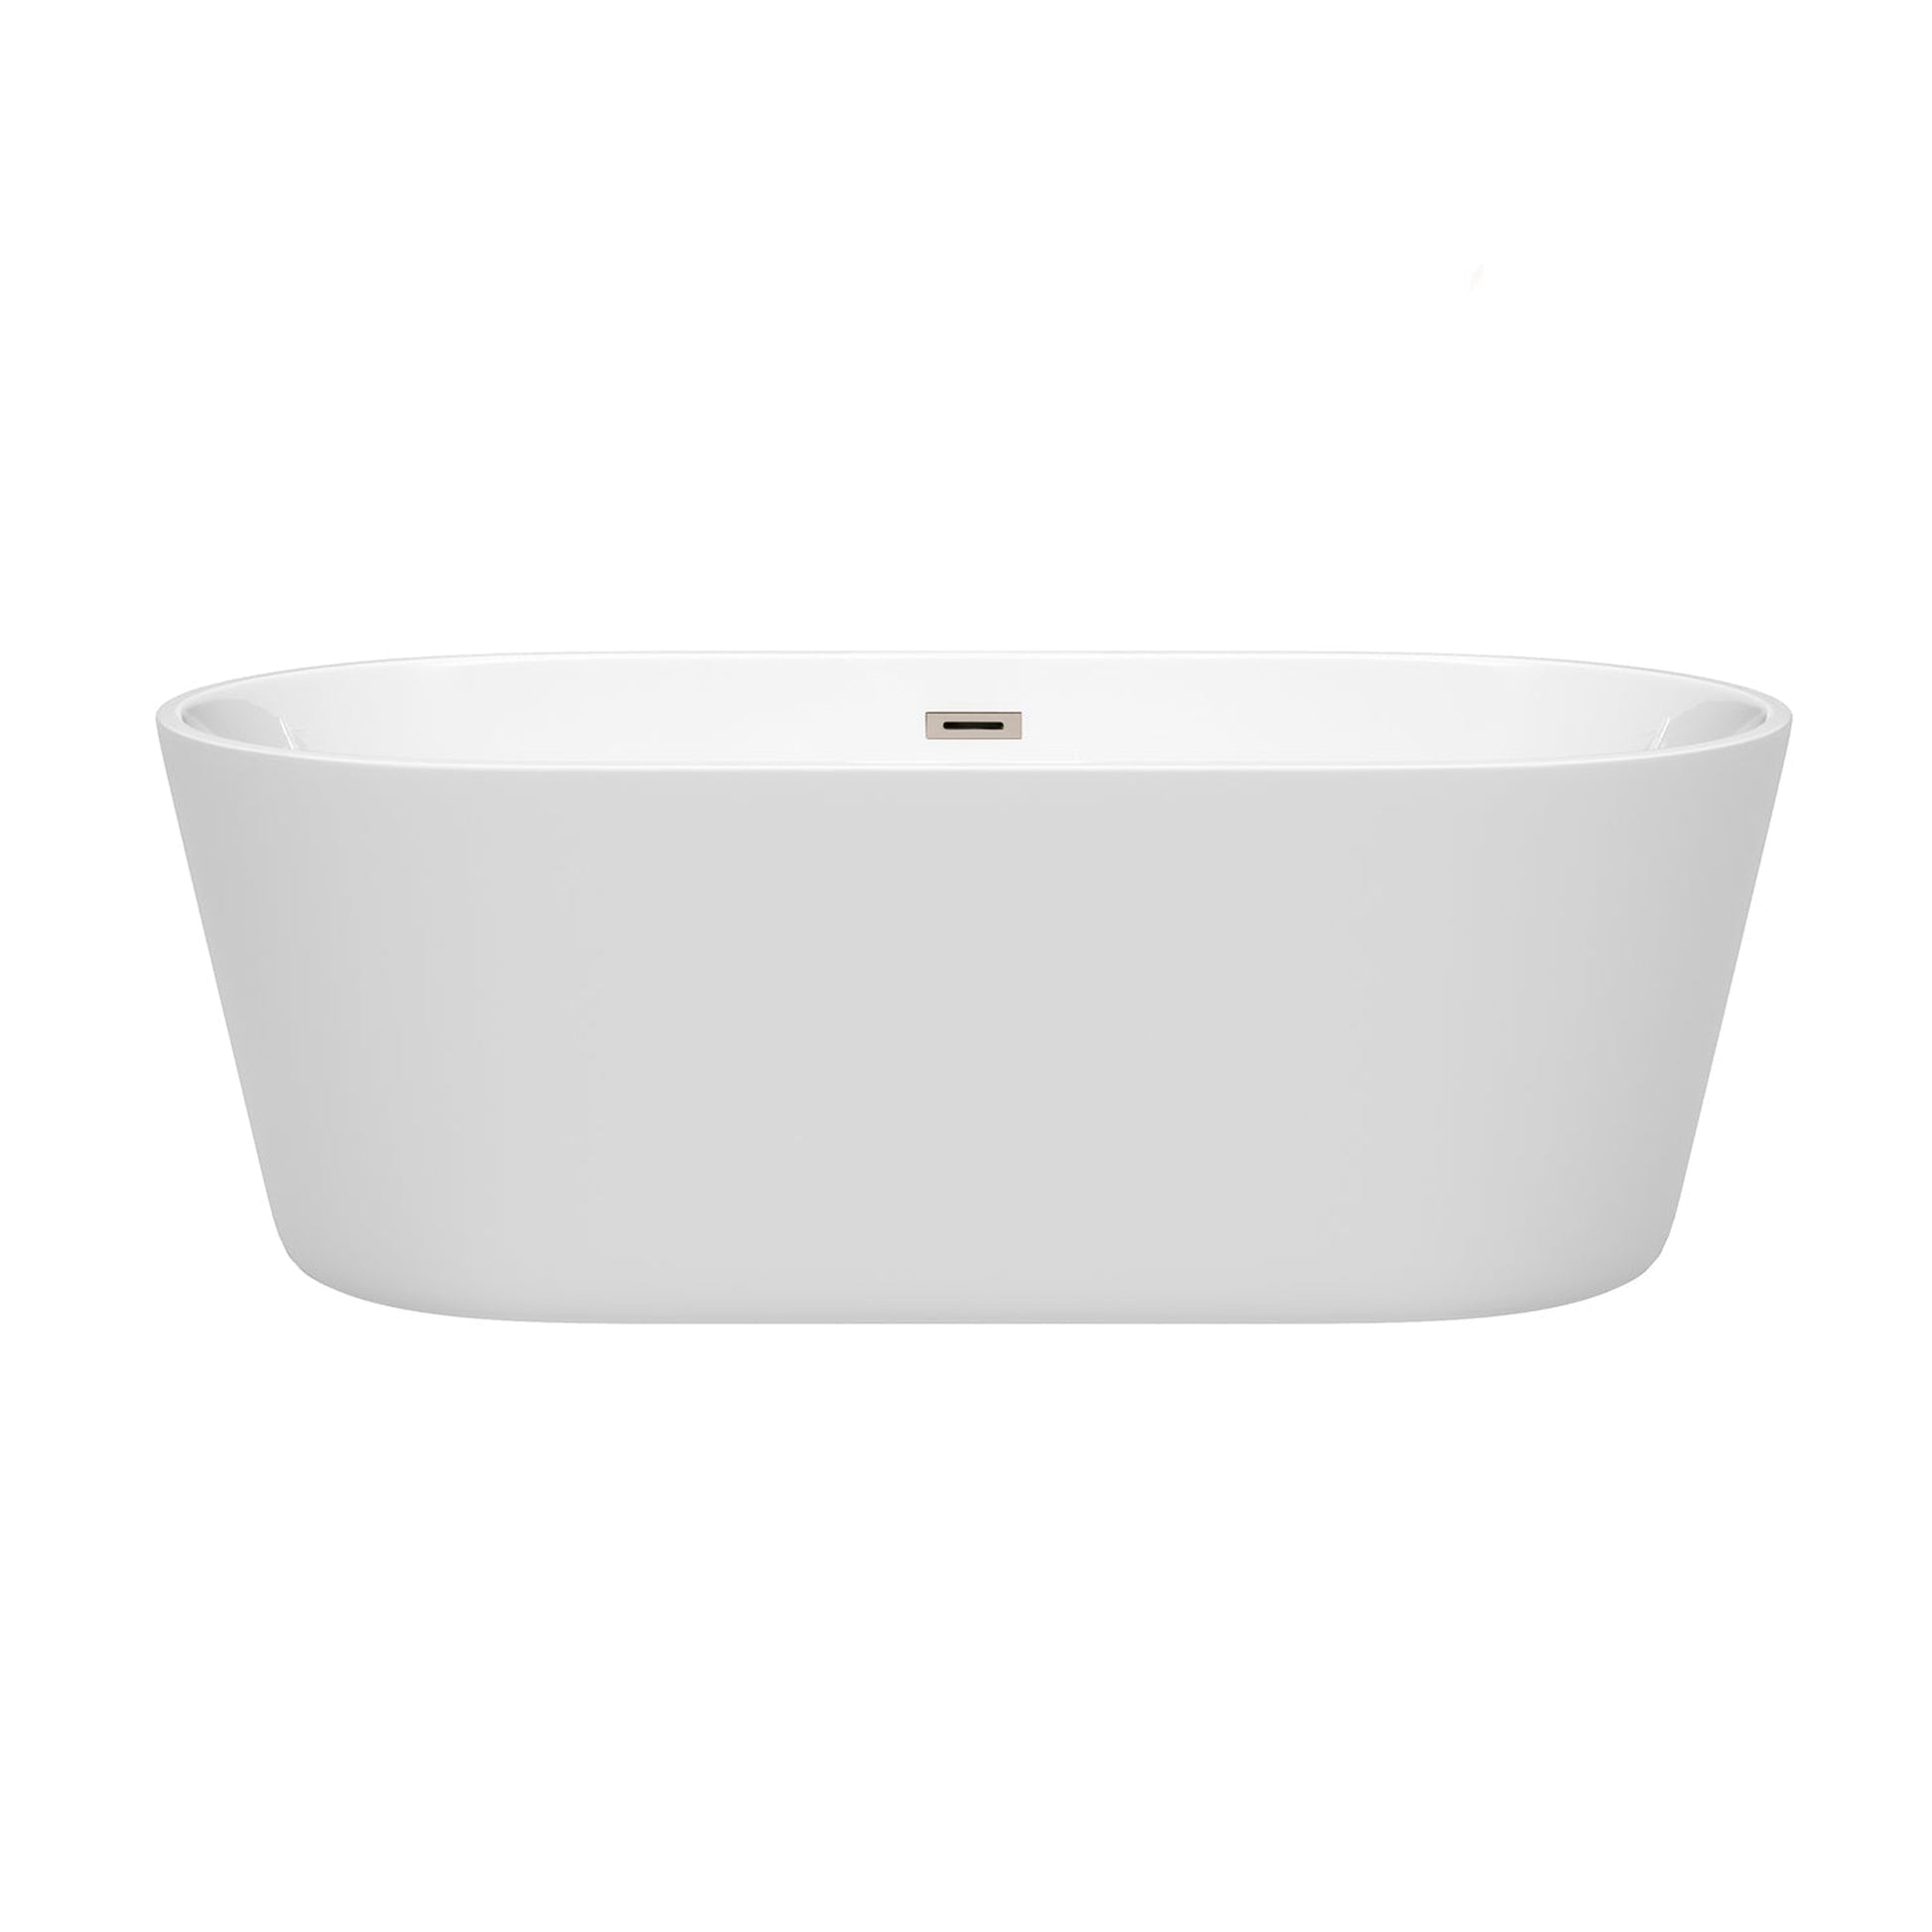 Wyndham Collection Carissa 67" Freestanding Bathtub in White With Brushed Nickel Drain and Overflow Trim